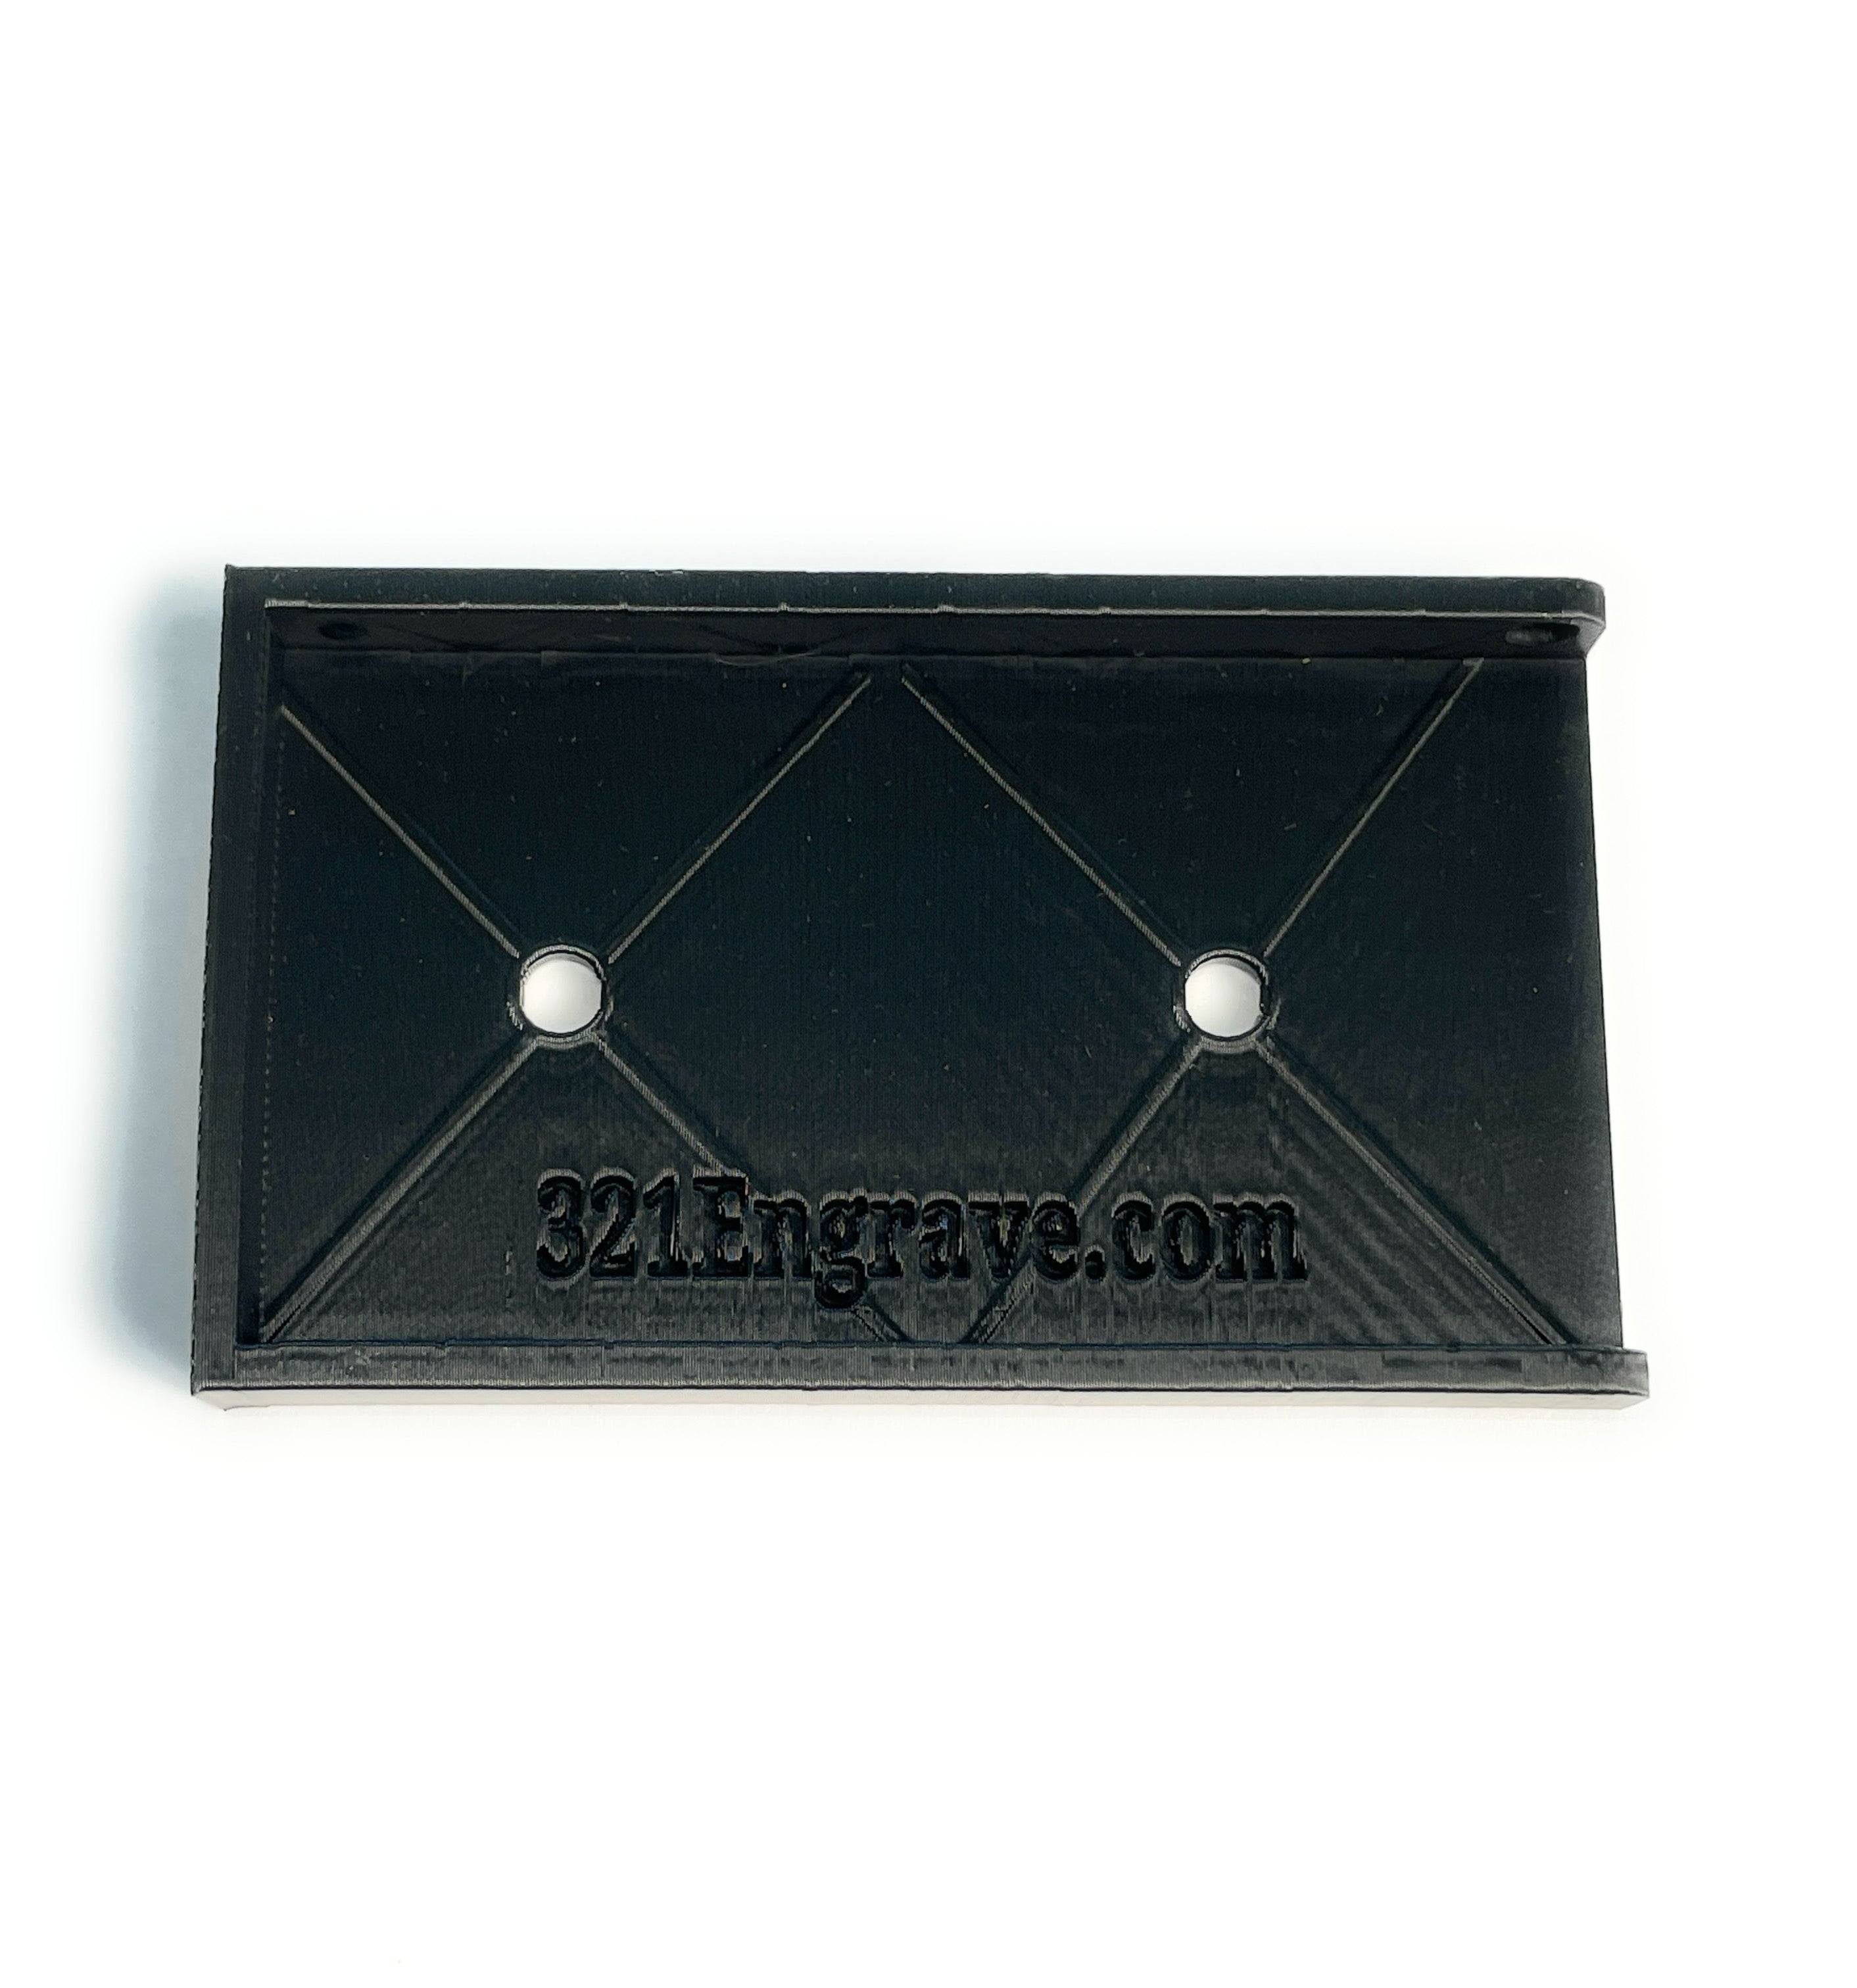 Use this black base plate to match or offset your mailbox flag for brick or stone mailboxes.